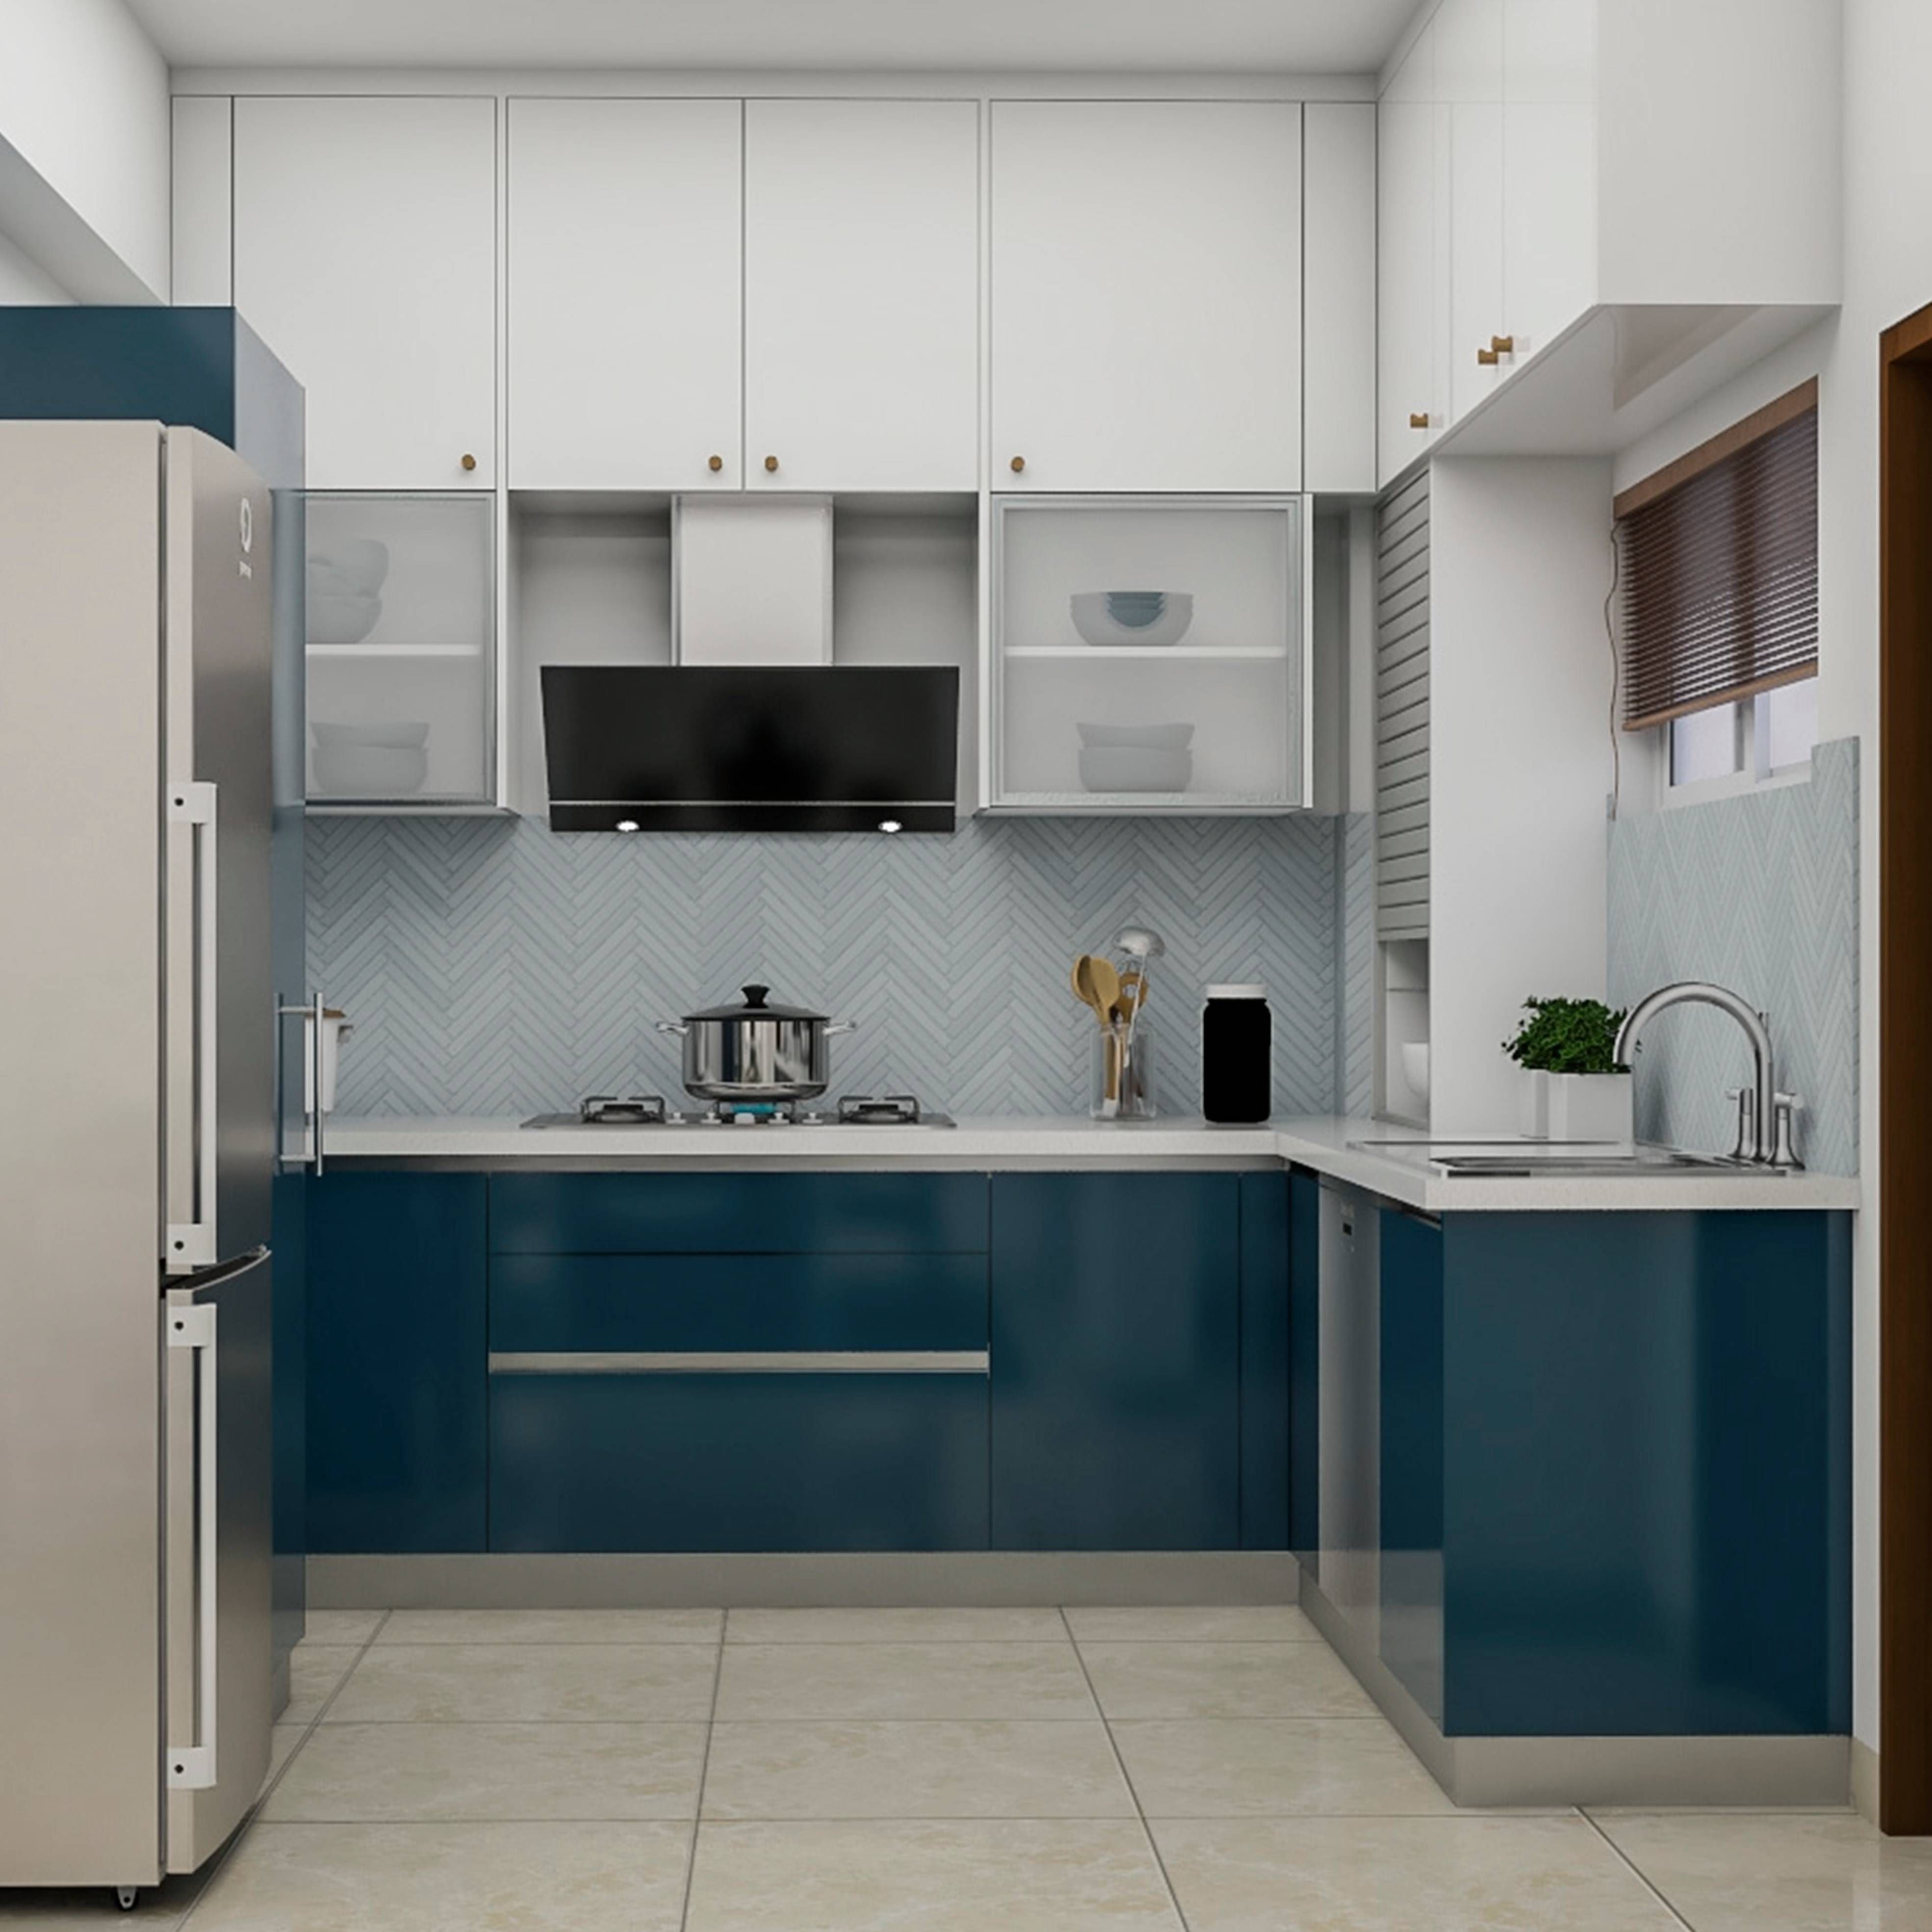 Modern L-Shaped Kitchen Cabinet Design In Blue And White